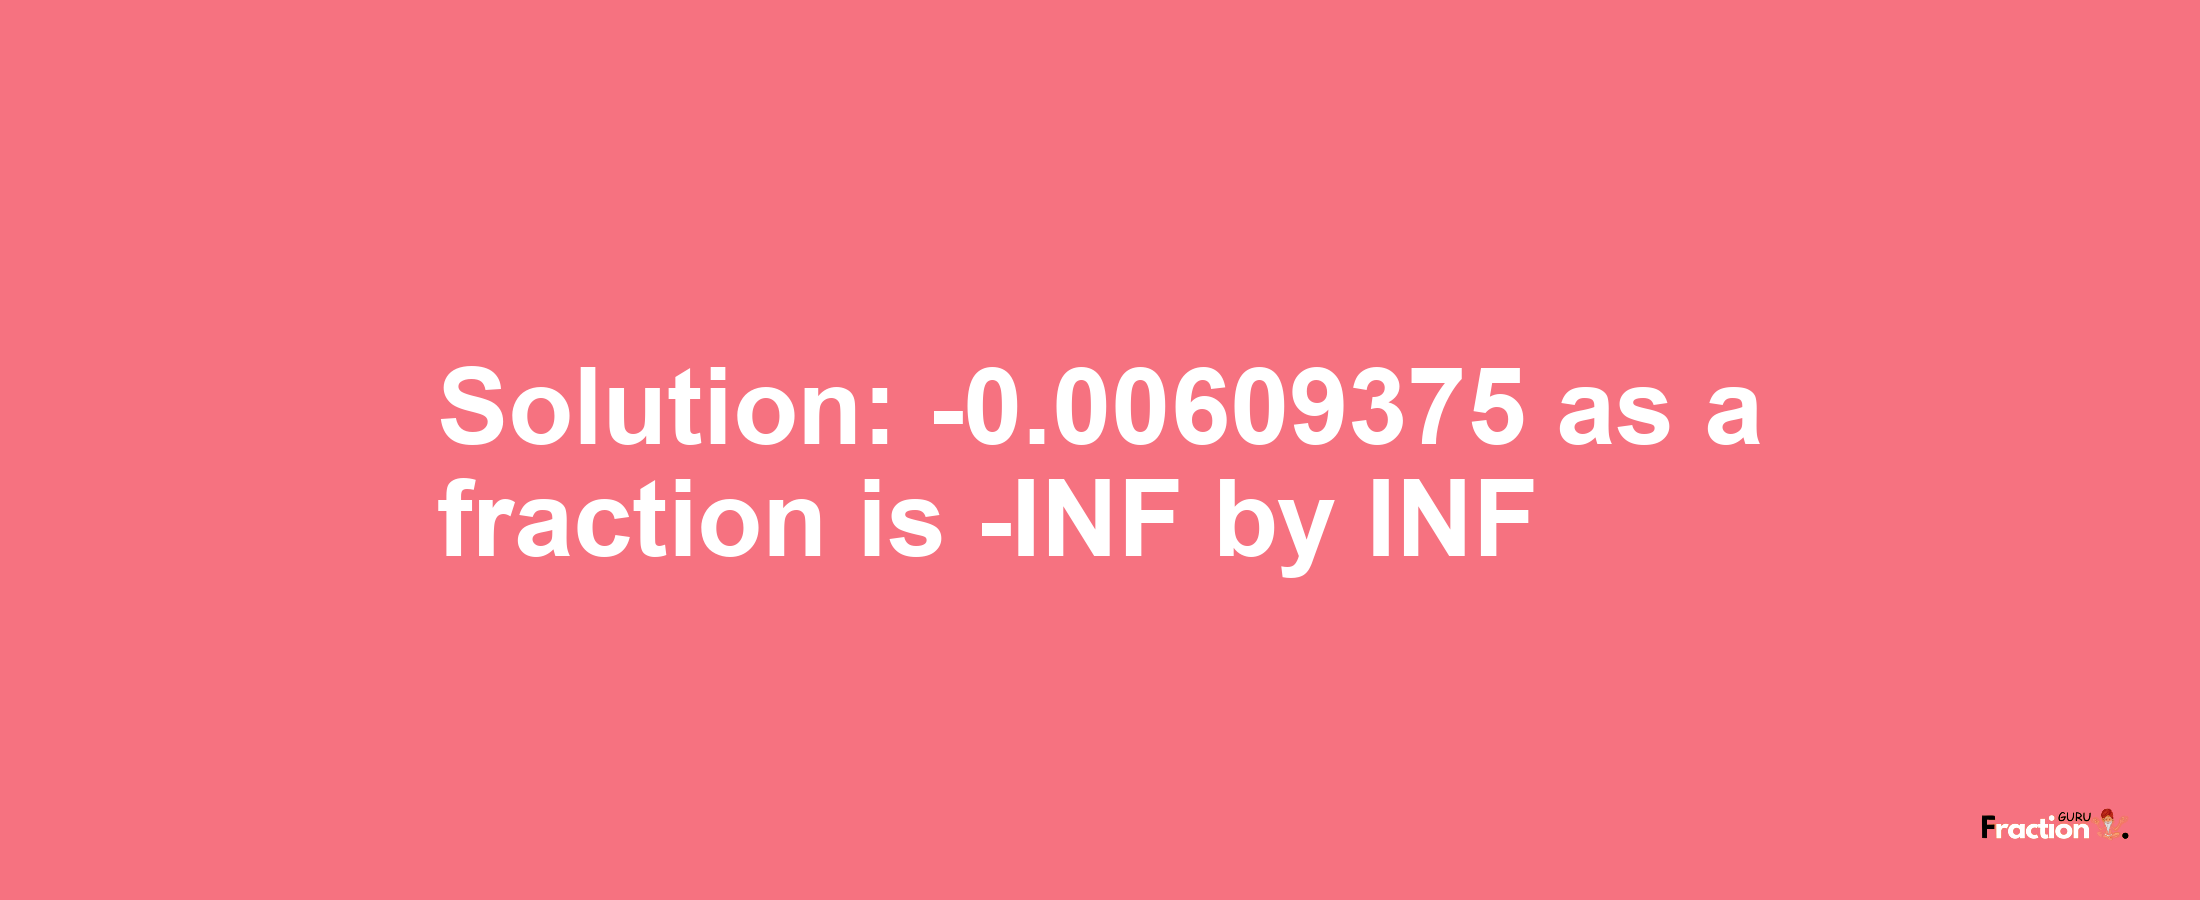 Solution:-0.00609375 as a fraction is -INF/INF